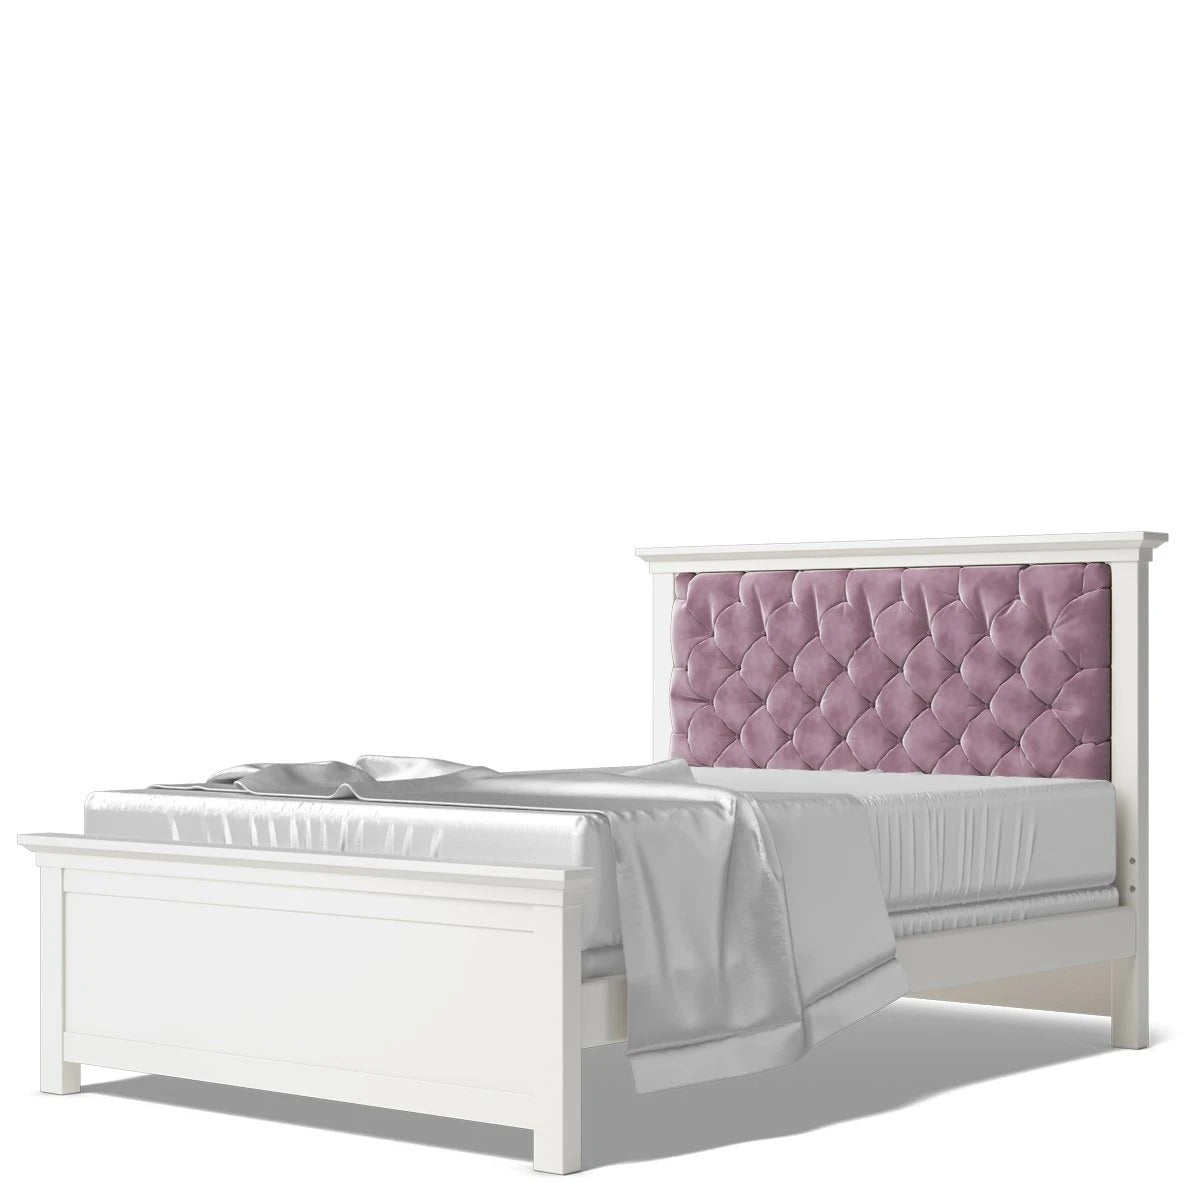 Full Bed Tufted Headboard Solid White with Pink Velvet